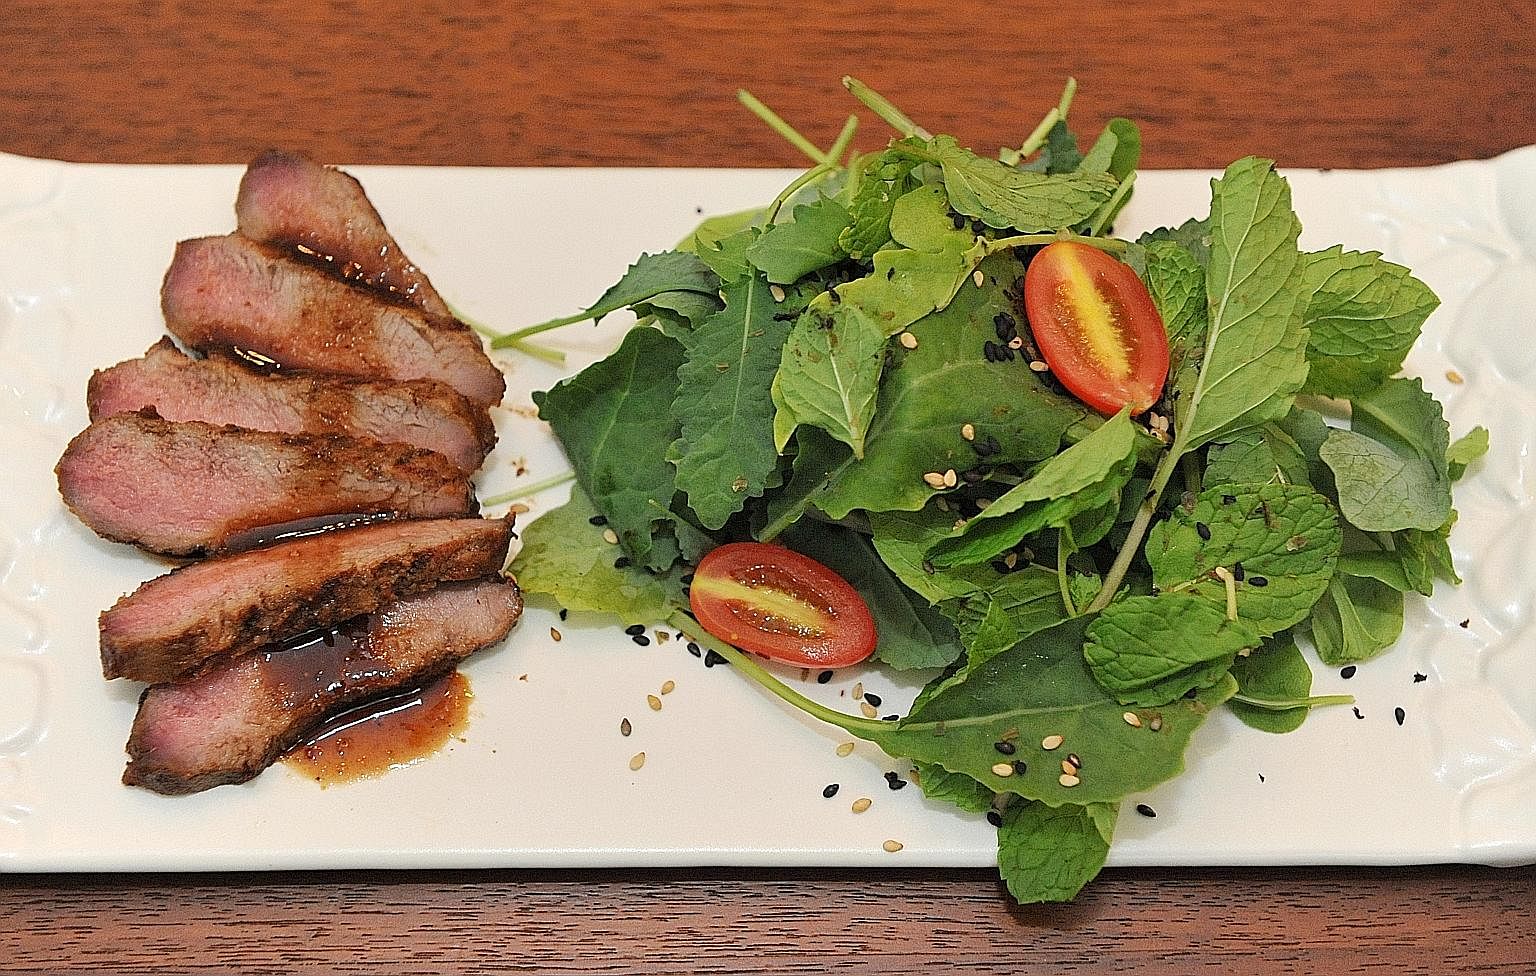 The grilled meat is served with bitter salad leaves to balance out the sweetness of the meat.